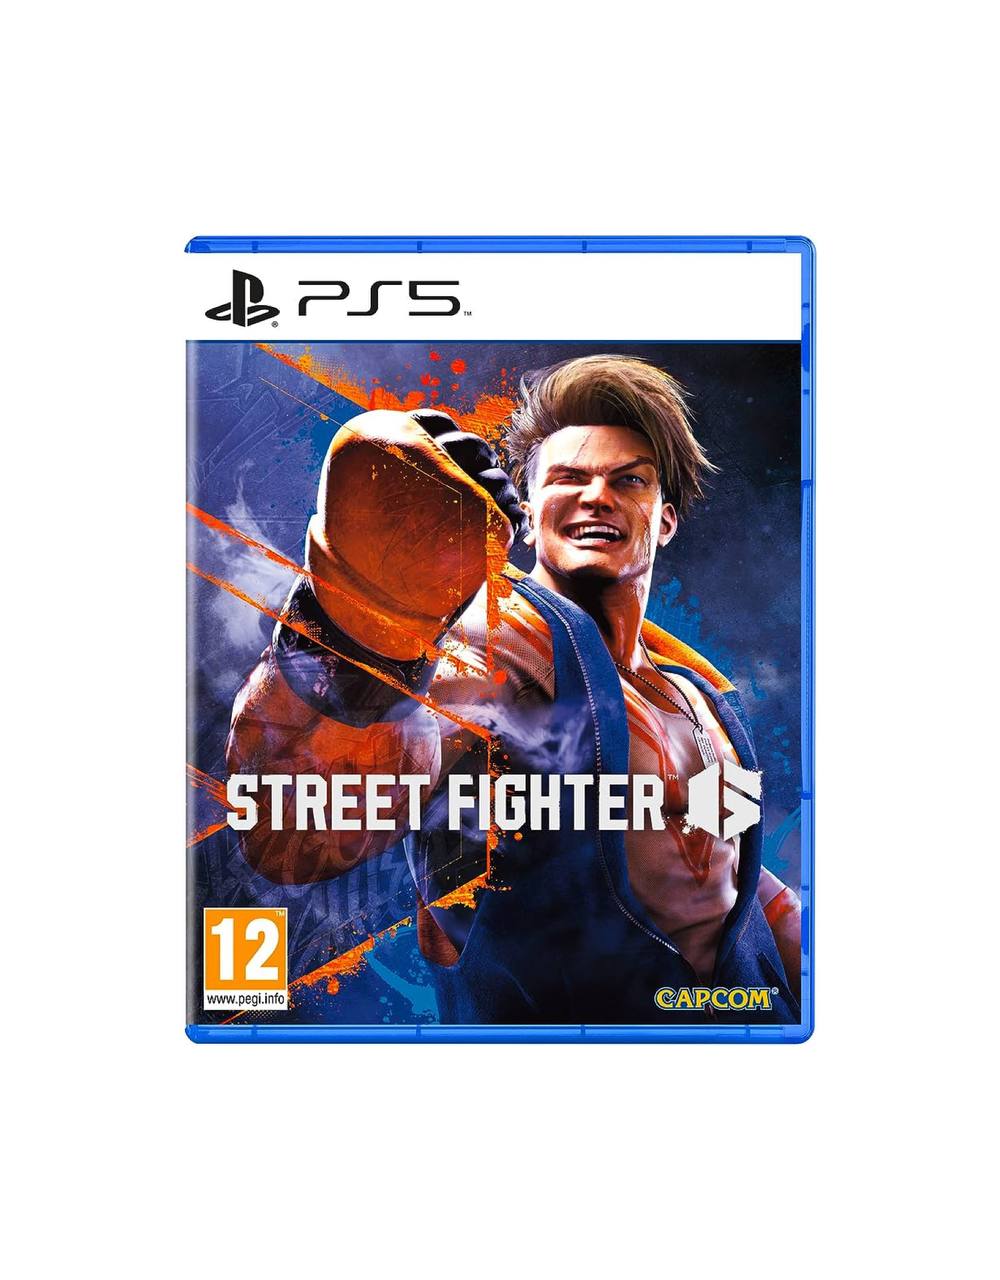 Ps5 Street fighter